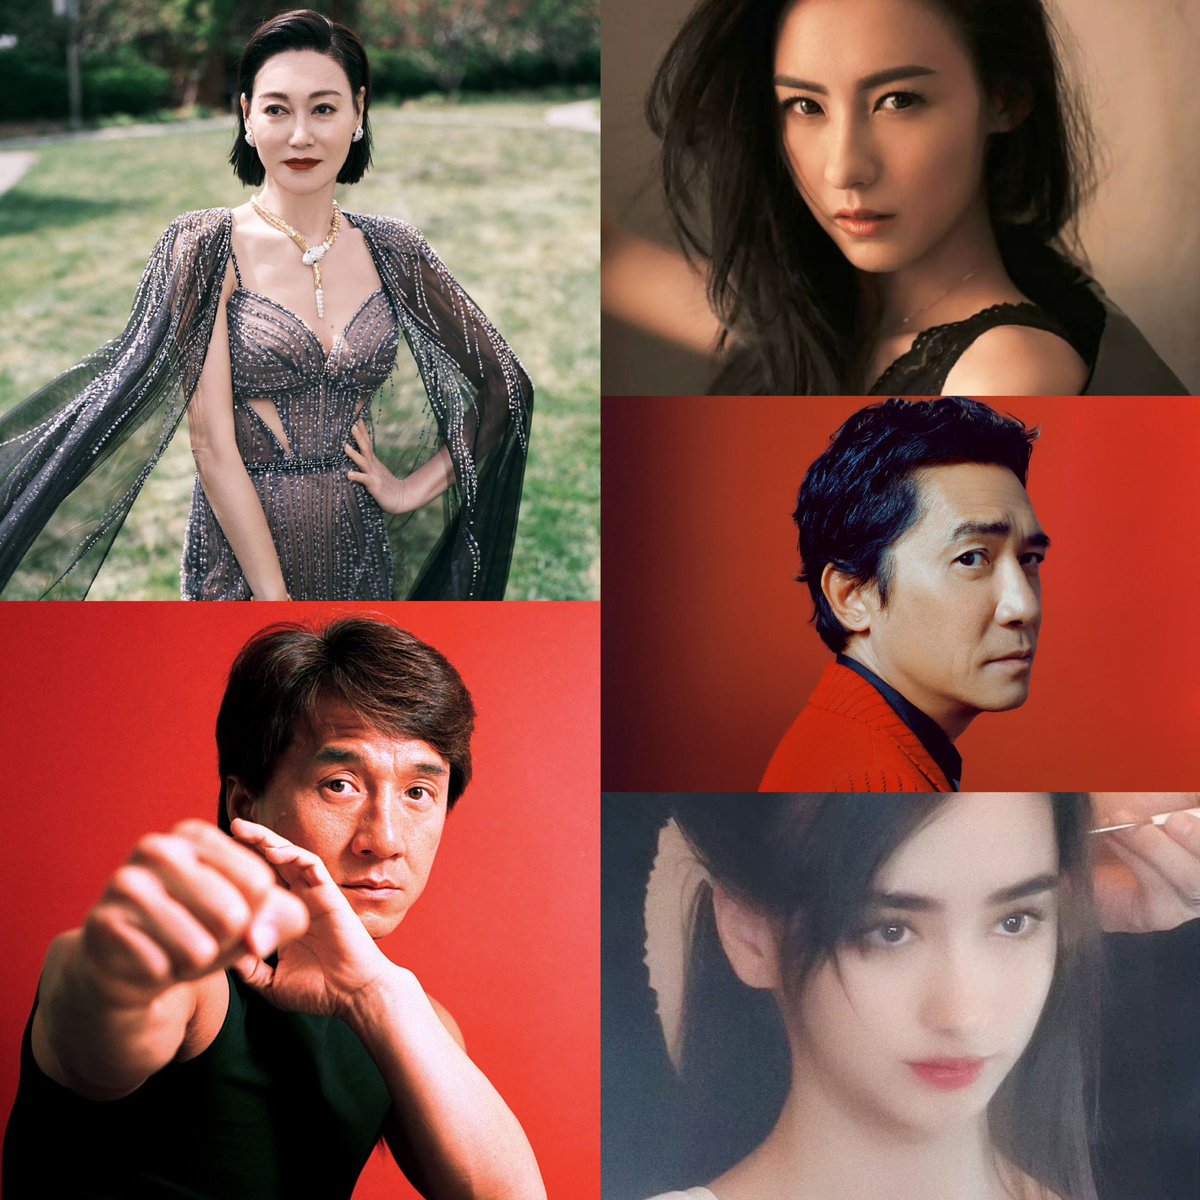 🍉 of #XiaoZhan,#ZhuangDafei’s Movie “Legend of Condor Heroes:
1. Other cast will be announced tomorrow: #HuiYinghong, #JackieChan, #CeciliaCheung, #TonyLeung, #VandaMargraf, etc.
2. Using 3D filming methods
3. XZ will go to Qingdao to train equestrian and archery on 27/5.

#Cpop